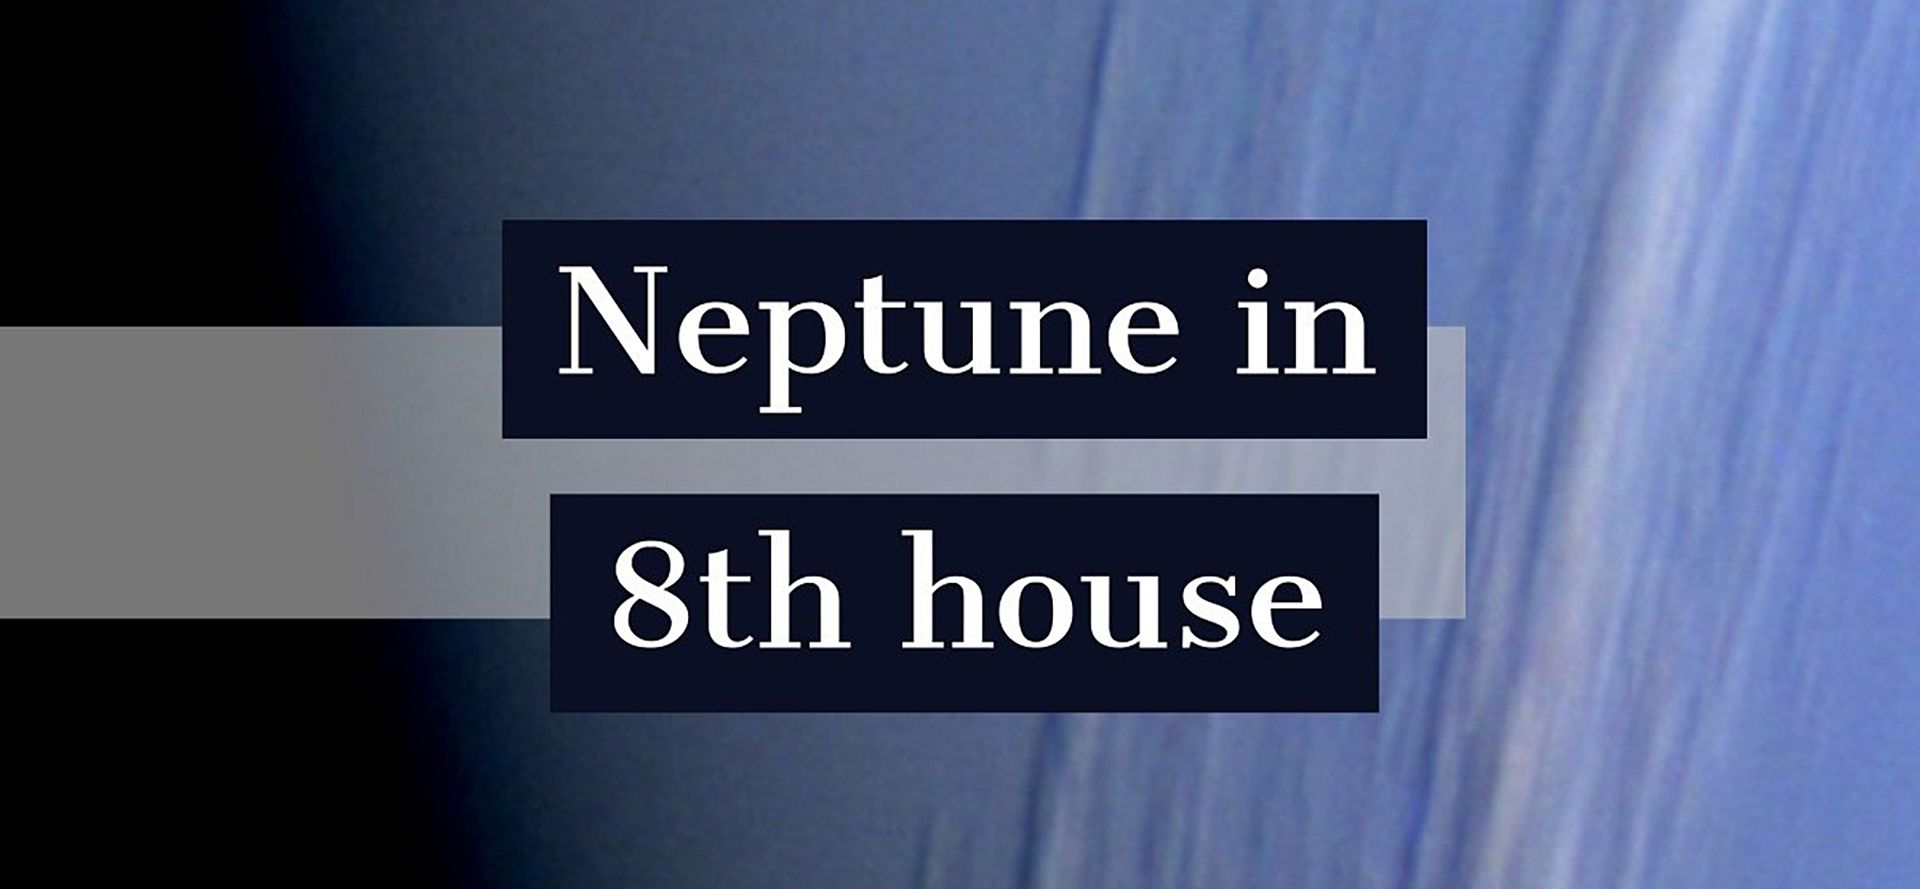 Neptune in 8th house.